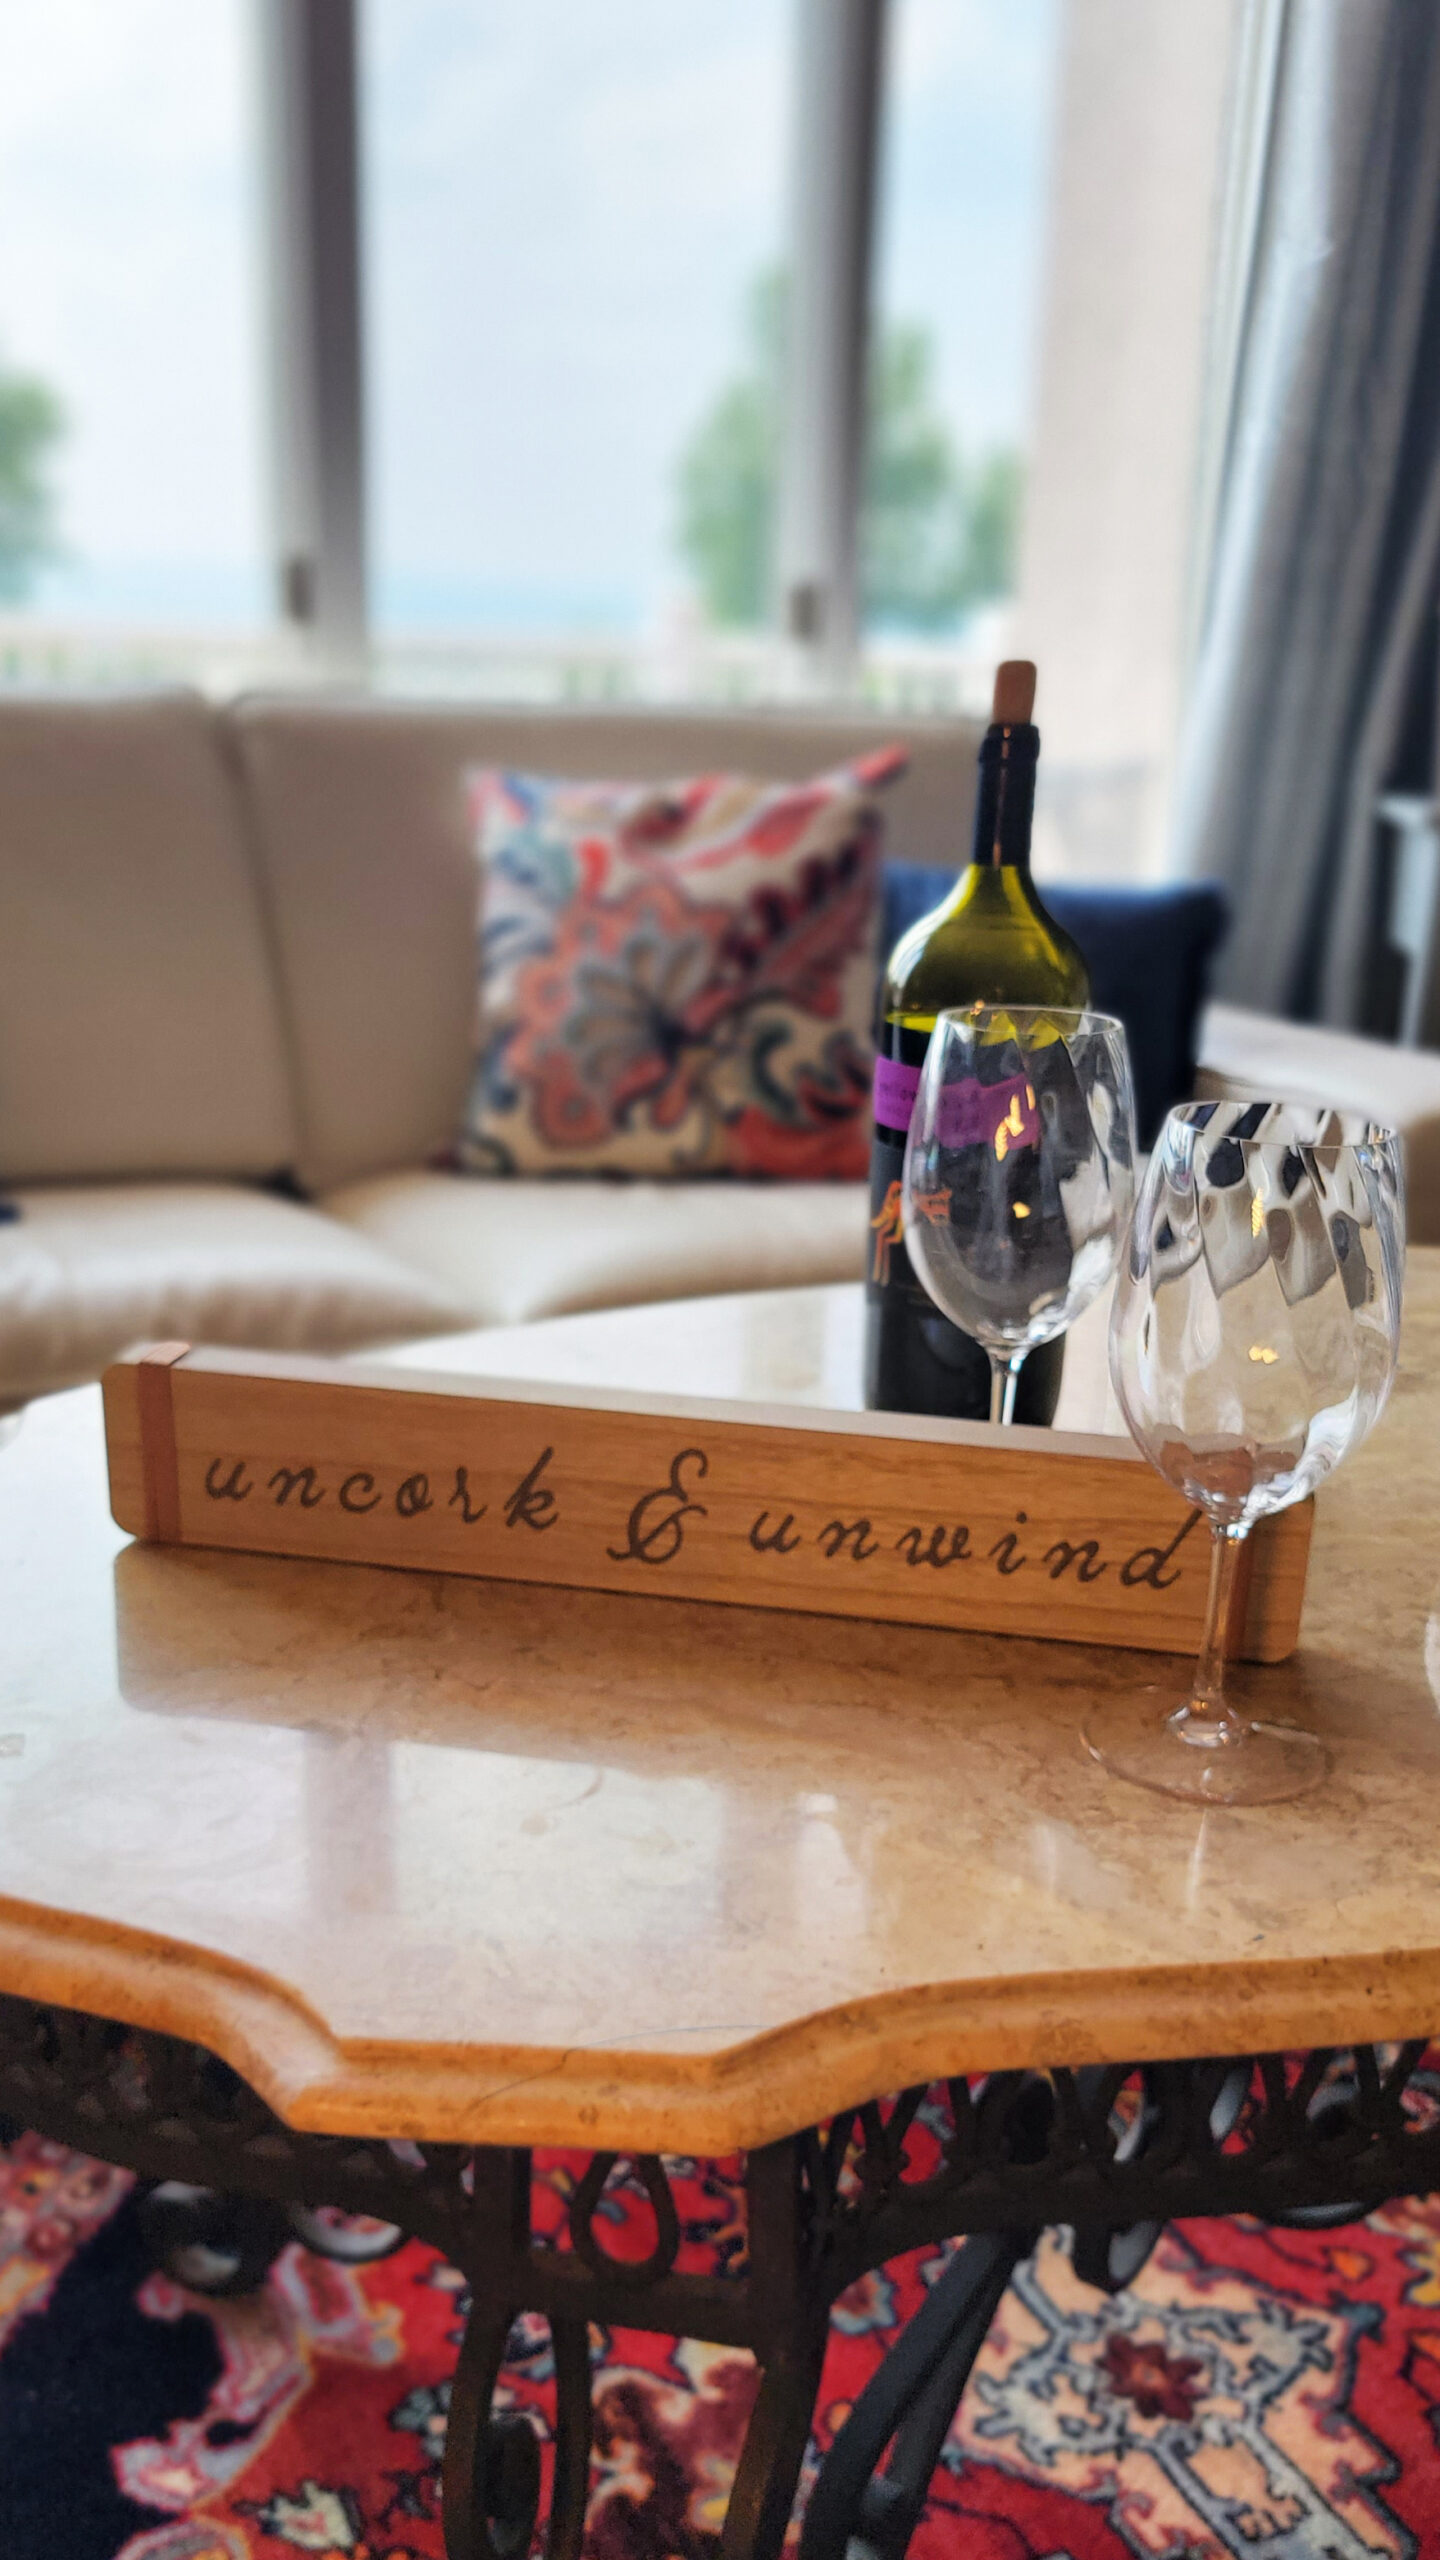 sample prop for Sky Blue Media's Summer Vibes promo service: Showing "uncork & unwind" wooden table decoration with 2 glasses and a wine bottle in the background